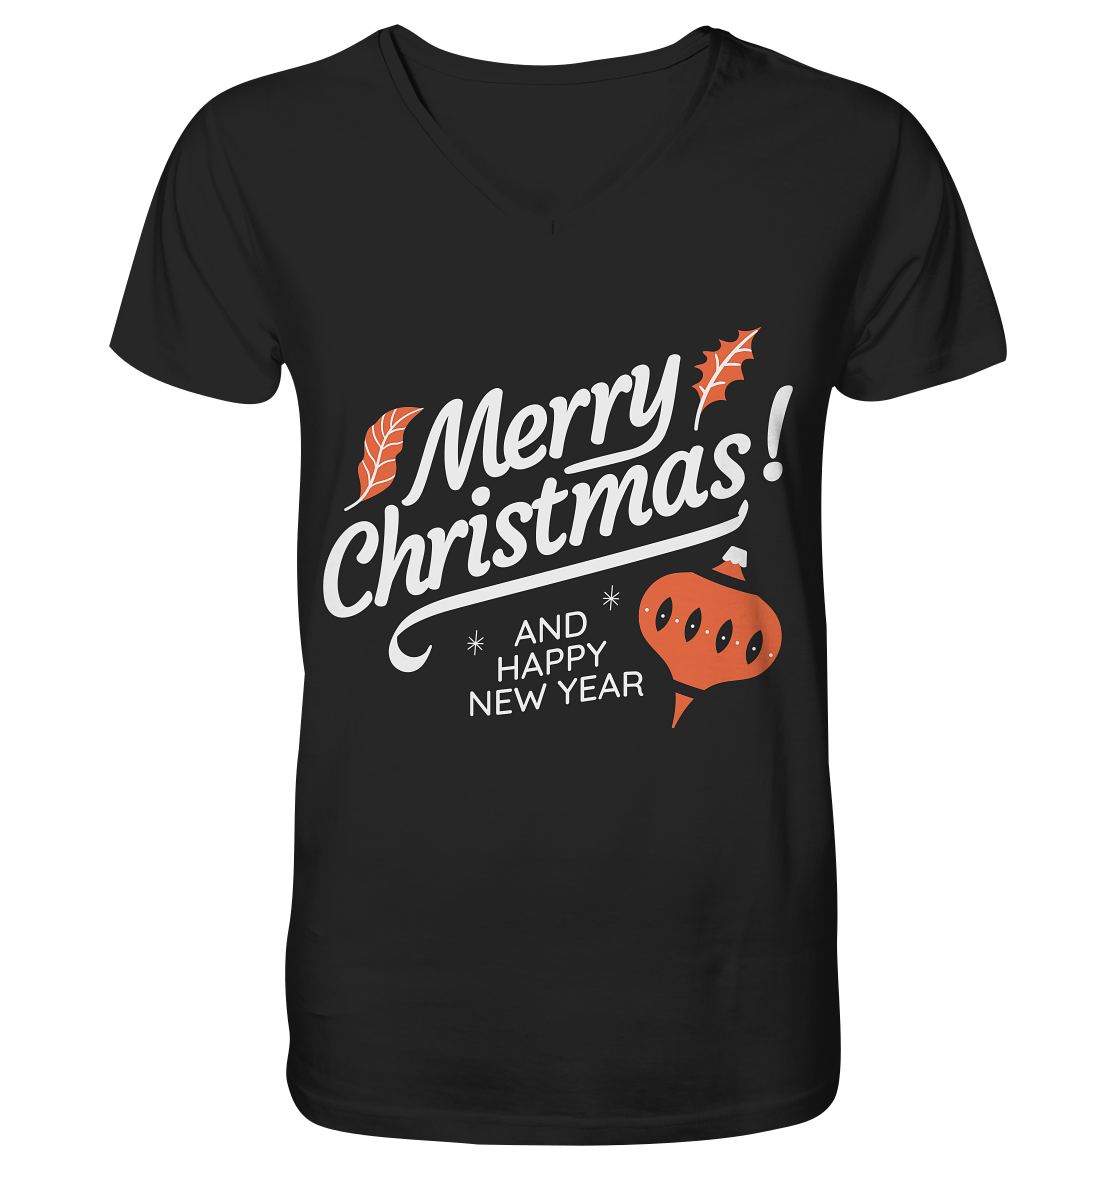 Merry Christmas and a Happy New Year, Merry Christmas and Happy New Year - V-Neck Shirt